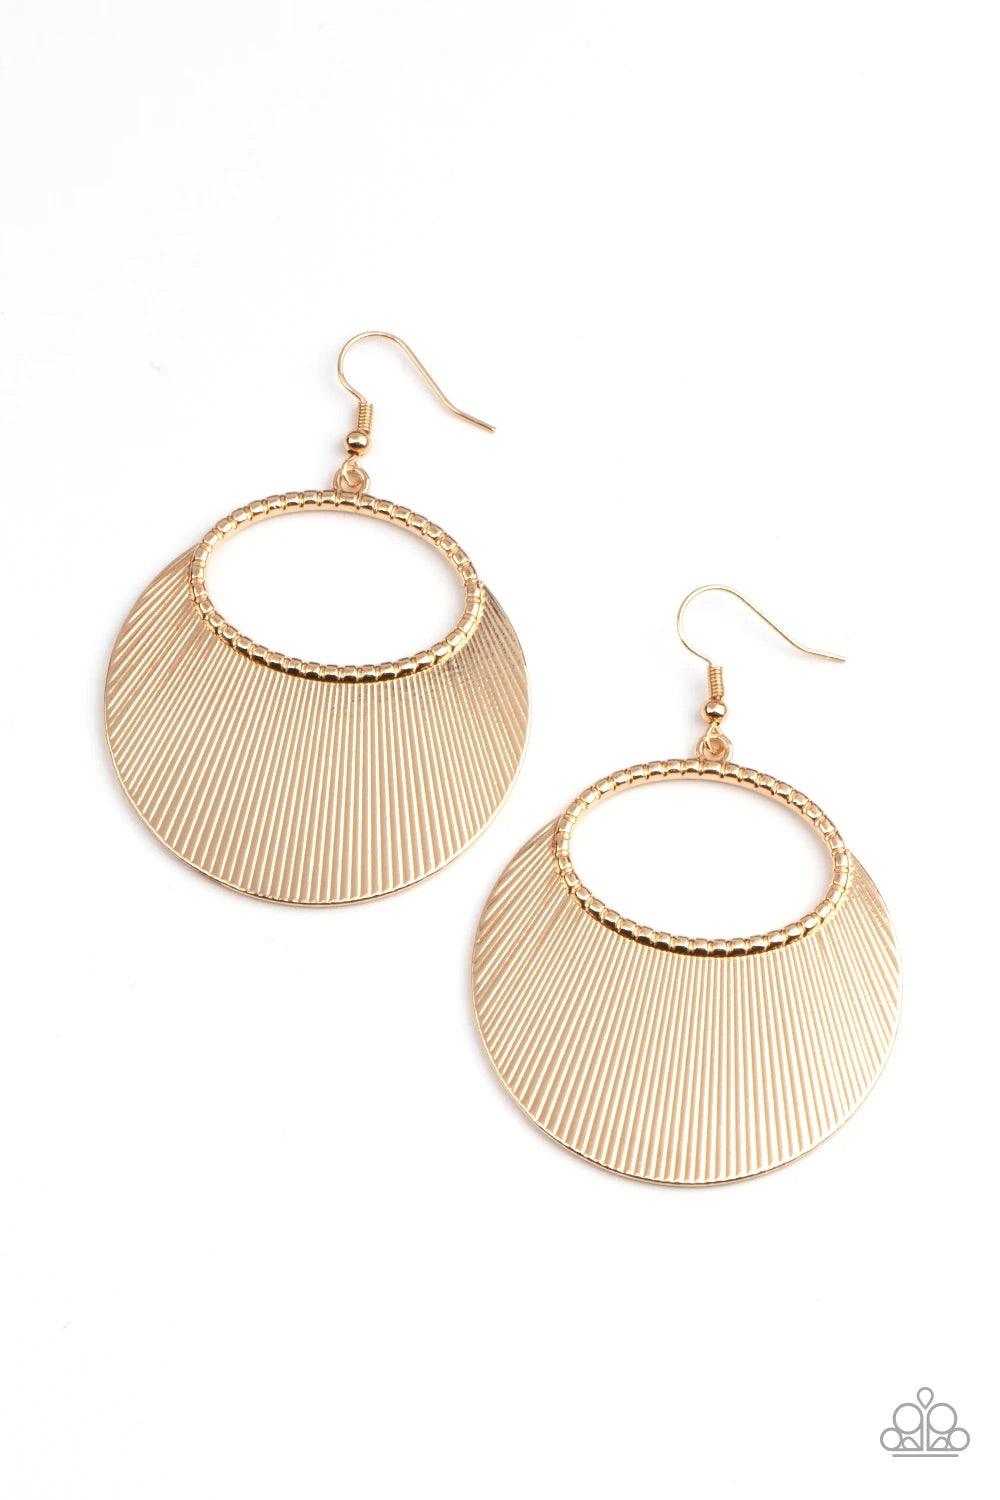 Paparazzi Accessories Fan Girl Glam - Gold Etched in linear texture, a crescent shaped plate fans out from the bottom of a textured gold oval, coalescing into a blinging metallic display. Earring attaches to a standard fishhook fitting. Sold as one pair o